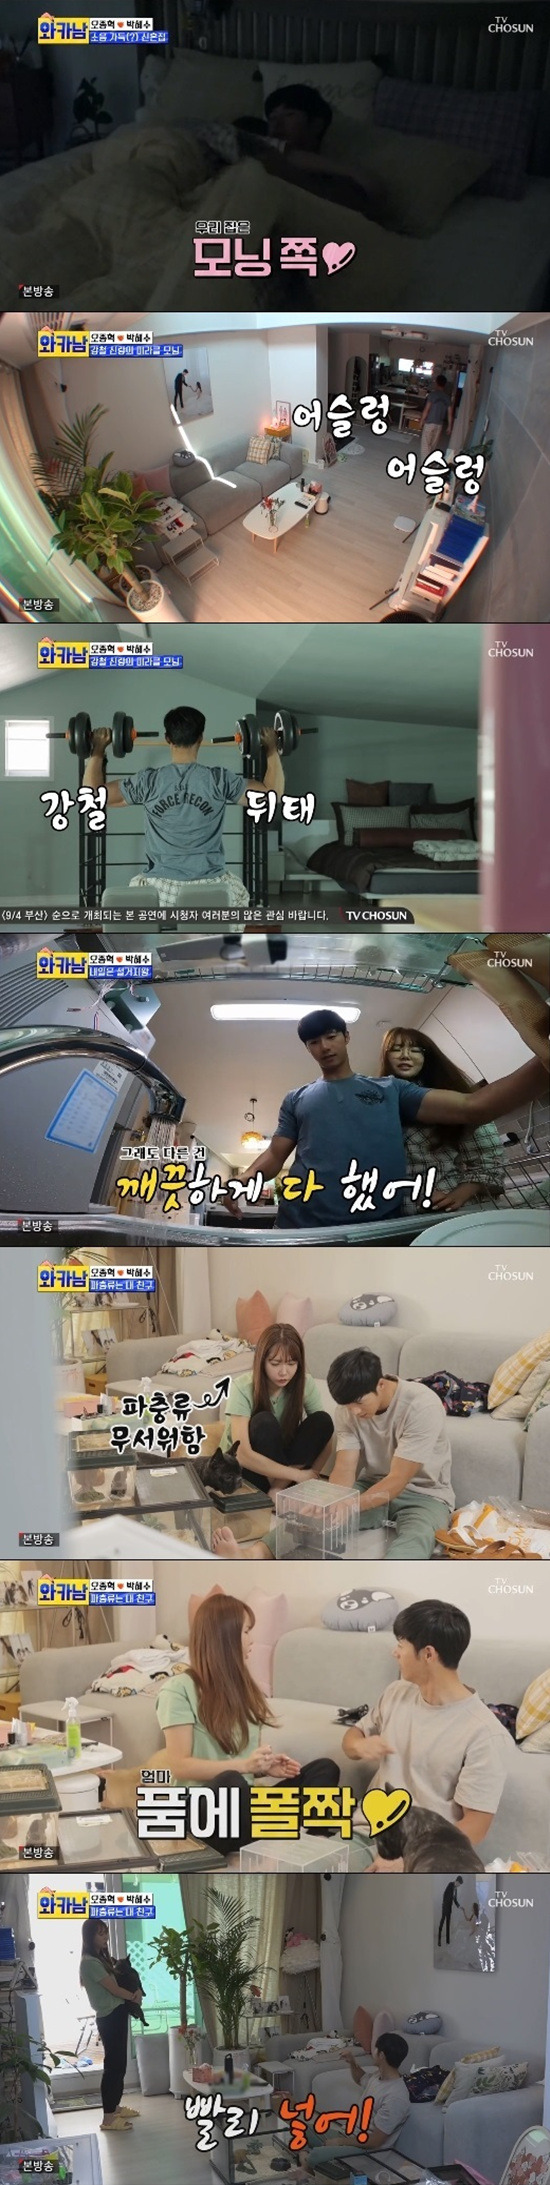 On the 29th, TV Chosun Wife Card Written Man attracted attention because the daily life of Oh Jong-hyuk - Park Hye-soo couple was revealed.On this day, Oh Jong-hyuk made his first appearance with his wife Park Hye-soo two months after marriage.Oh Jong-hyuk said that when MCs wondered about the love story, they had been dating for about four years, and went to drink coffee with Friend and met their wife.At that time, my wife came to drink my wifes Friend and Coffee, but it turned out that Friends knew each other.Oh Jong-hyuk also released the nickname; the nickname Park Hye-soo sang Oh Jong-hyuk was his brother; Oh Jong-hyuks nickname for his wife was Saxi.Oh Jong-hyuk got up as he gave Park Hye-soo a morning kiss.Oh Jong-hyuk was asked if he was kissing every morning in the studio and said, Every time I look pretty, not just in the morning.Oh Jong-hyuk left Park Hye-soo to sleep more and went up to the double floor alone and had time to exercise starting with push-up.Originally, I exercise outside, but because of Corona, I was late at home because of the work.Oh Jong-hyuk wanted to go up to the outdoor terrace with Coffee and enjoy the view, but he was curious because he was in the process of construction next to him and was hidden in another building.A year ago, it was an open view, but as the buildings entered, they lost their views and got a neighbor.Oh Jong-hyuk was carefully washing dishes so that Park Hye-soo wouldnt break, then broke a cup; Park Hye-soo came out into the kitchen to the sound.Oh Jong-hyuk tried to cover the cup but Park Hye-soo was already noticing.Oh Jong-hyuk finished washing dishes and surprised everyone by revealing his reptilian love by revealing the lizards and snakes he was raising at home.Oh Jong-hyuk said he likes the feeling of touching the scales of reptiles - but Park Hye-soo is scared of reptiles.Park Hye-soo was busy cracking down on his pet dog Carru and Lurur as Oh Jong-hyuk pulled out the snake.Park Hye-soo saw a snake that grew while he could not see it, I think I will never touch it.Put it in quickly, he said urgently, but Oh Jong-hyuk did not seem to have any intention of putting the snake in any time soon.Oh Jong-hyuk said in the studio, The touch really falls out; Oh Jong-hyuk said, I dont know the wipes, but they were gone once: they came out through the gaps in the handles.I found it for two days, I was in my clothes pocket, he said.Photo: TV Chosun Broadcasting Screen